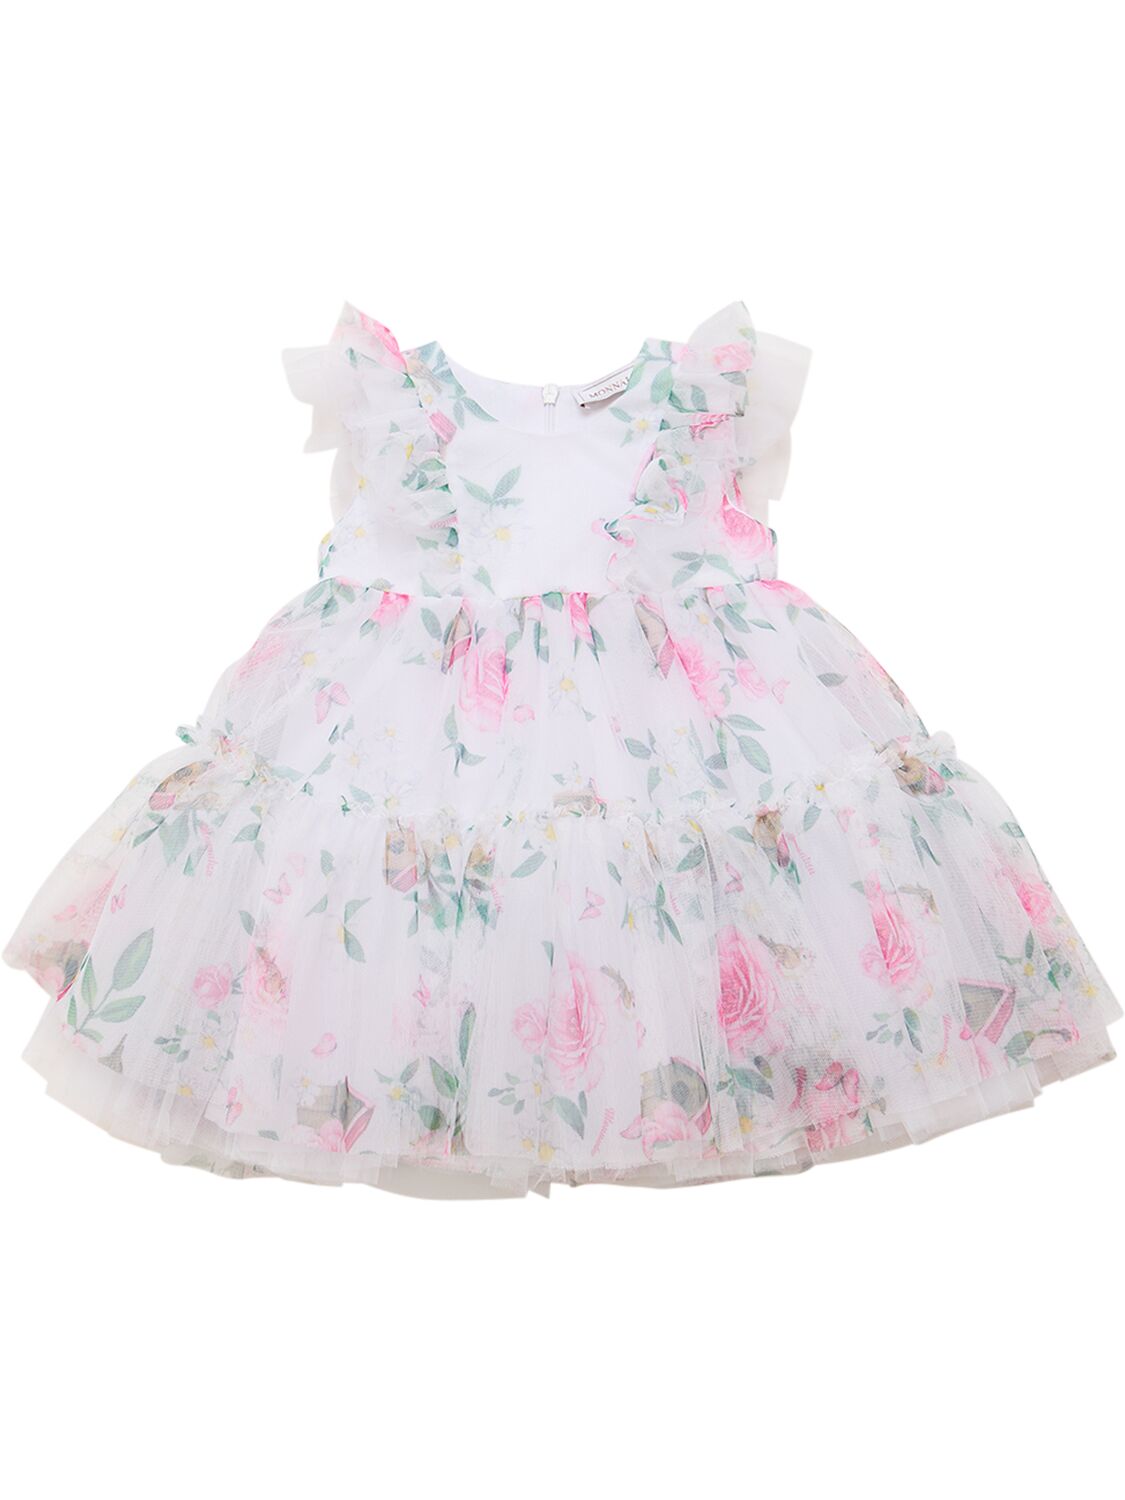 Monnalisa Kids' Flower Printed Tulle Party Dress In White